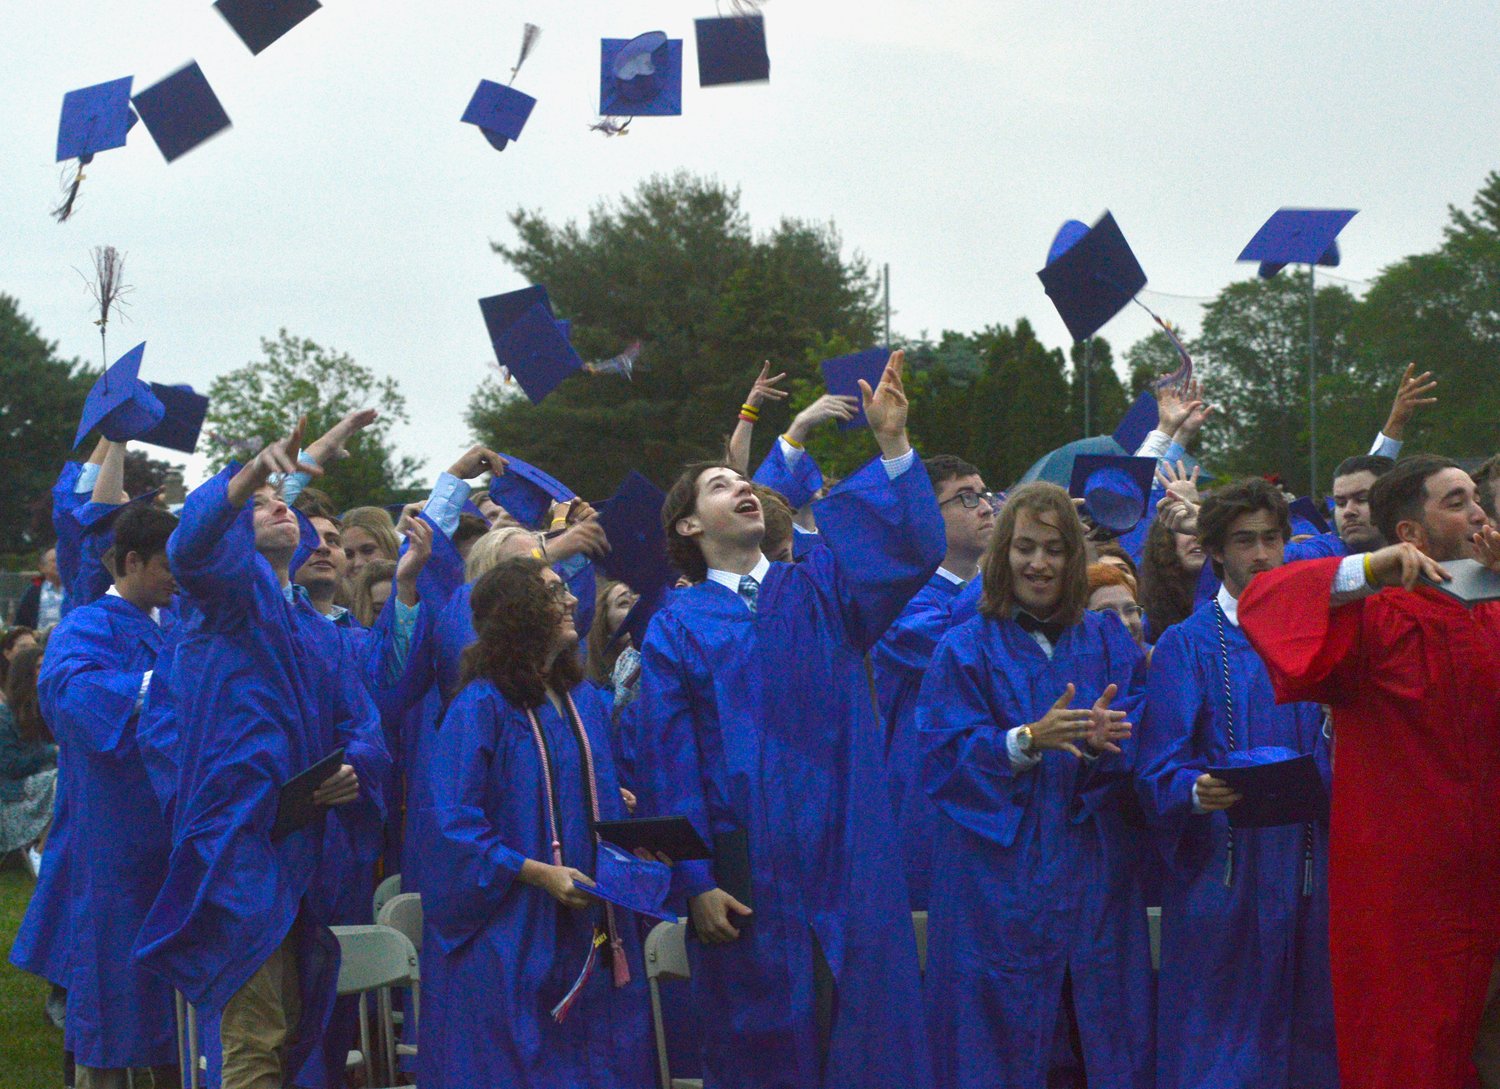 Graduating seniors toss their caps into the air at the end of the ceremony.